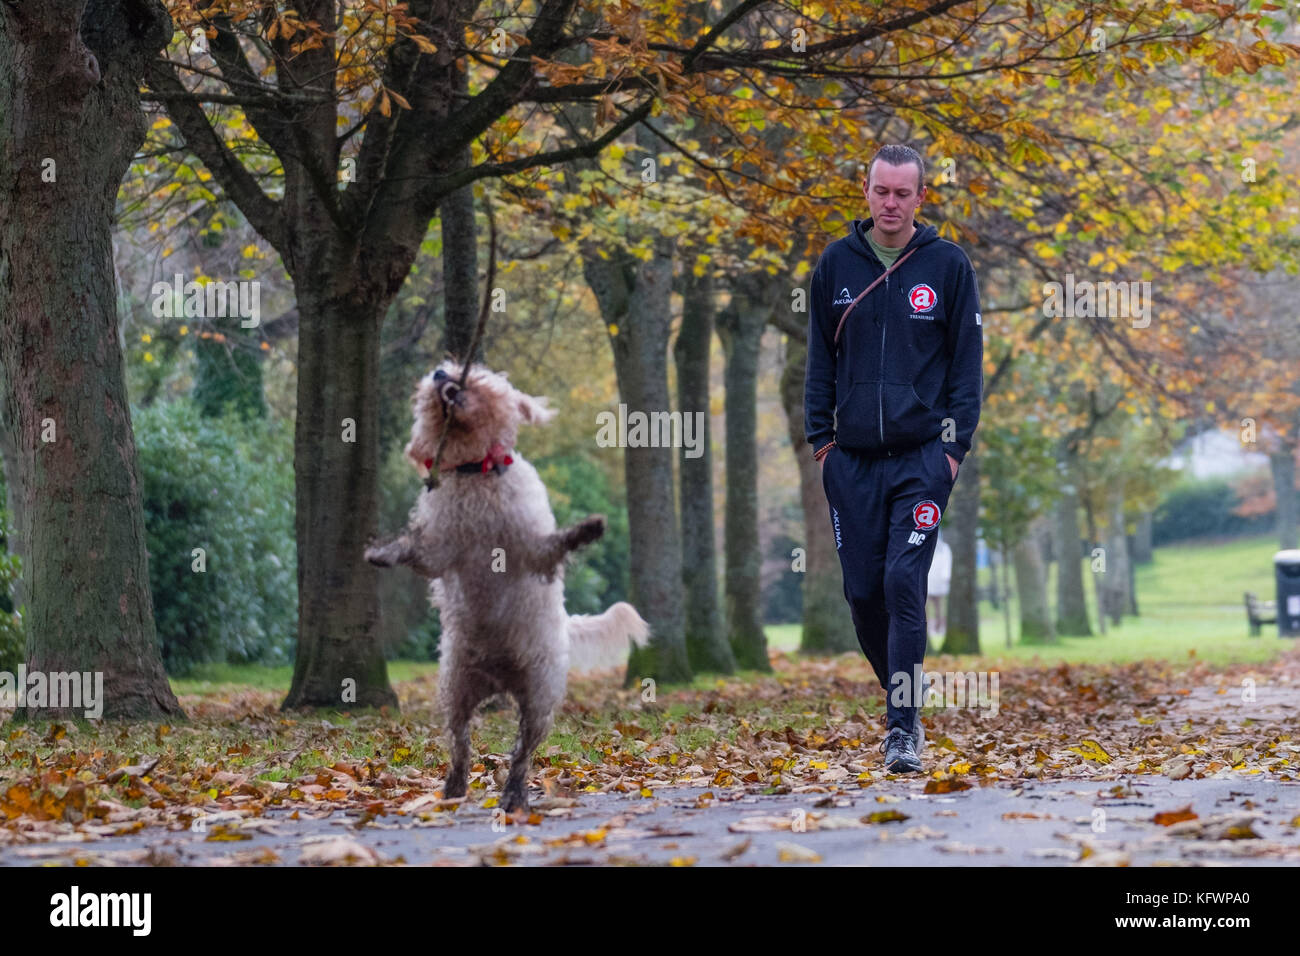 Aberystwyth Wales UK, Wednesday 1 November 2017 UK weather: DARWIN, a two and a half year old Labradoddle, enjoys an outing to Plascrug Avenue in Aberystwyth on the first day of November, with all the deciduous trees shedding their leaves in a myriad of rich autumnal colours photo Credit: Keith Morris/Alamy Live News Stock Photo